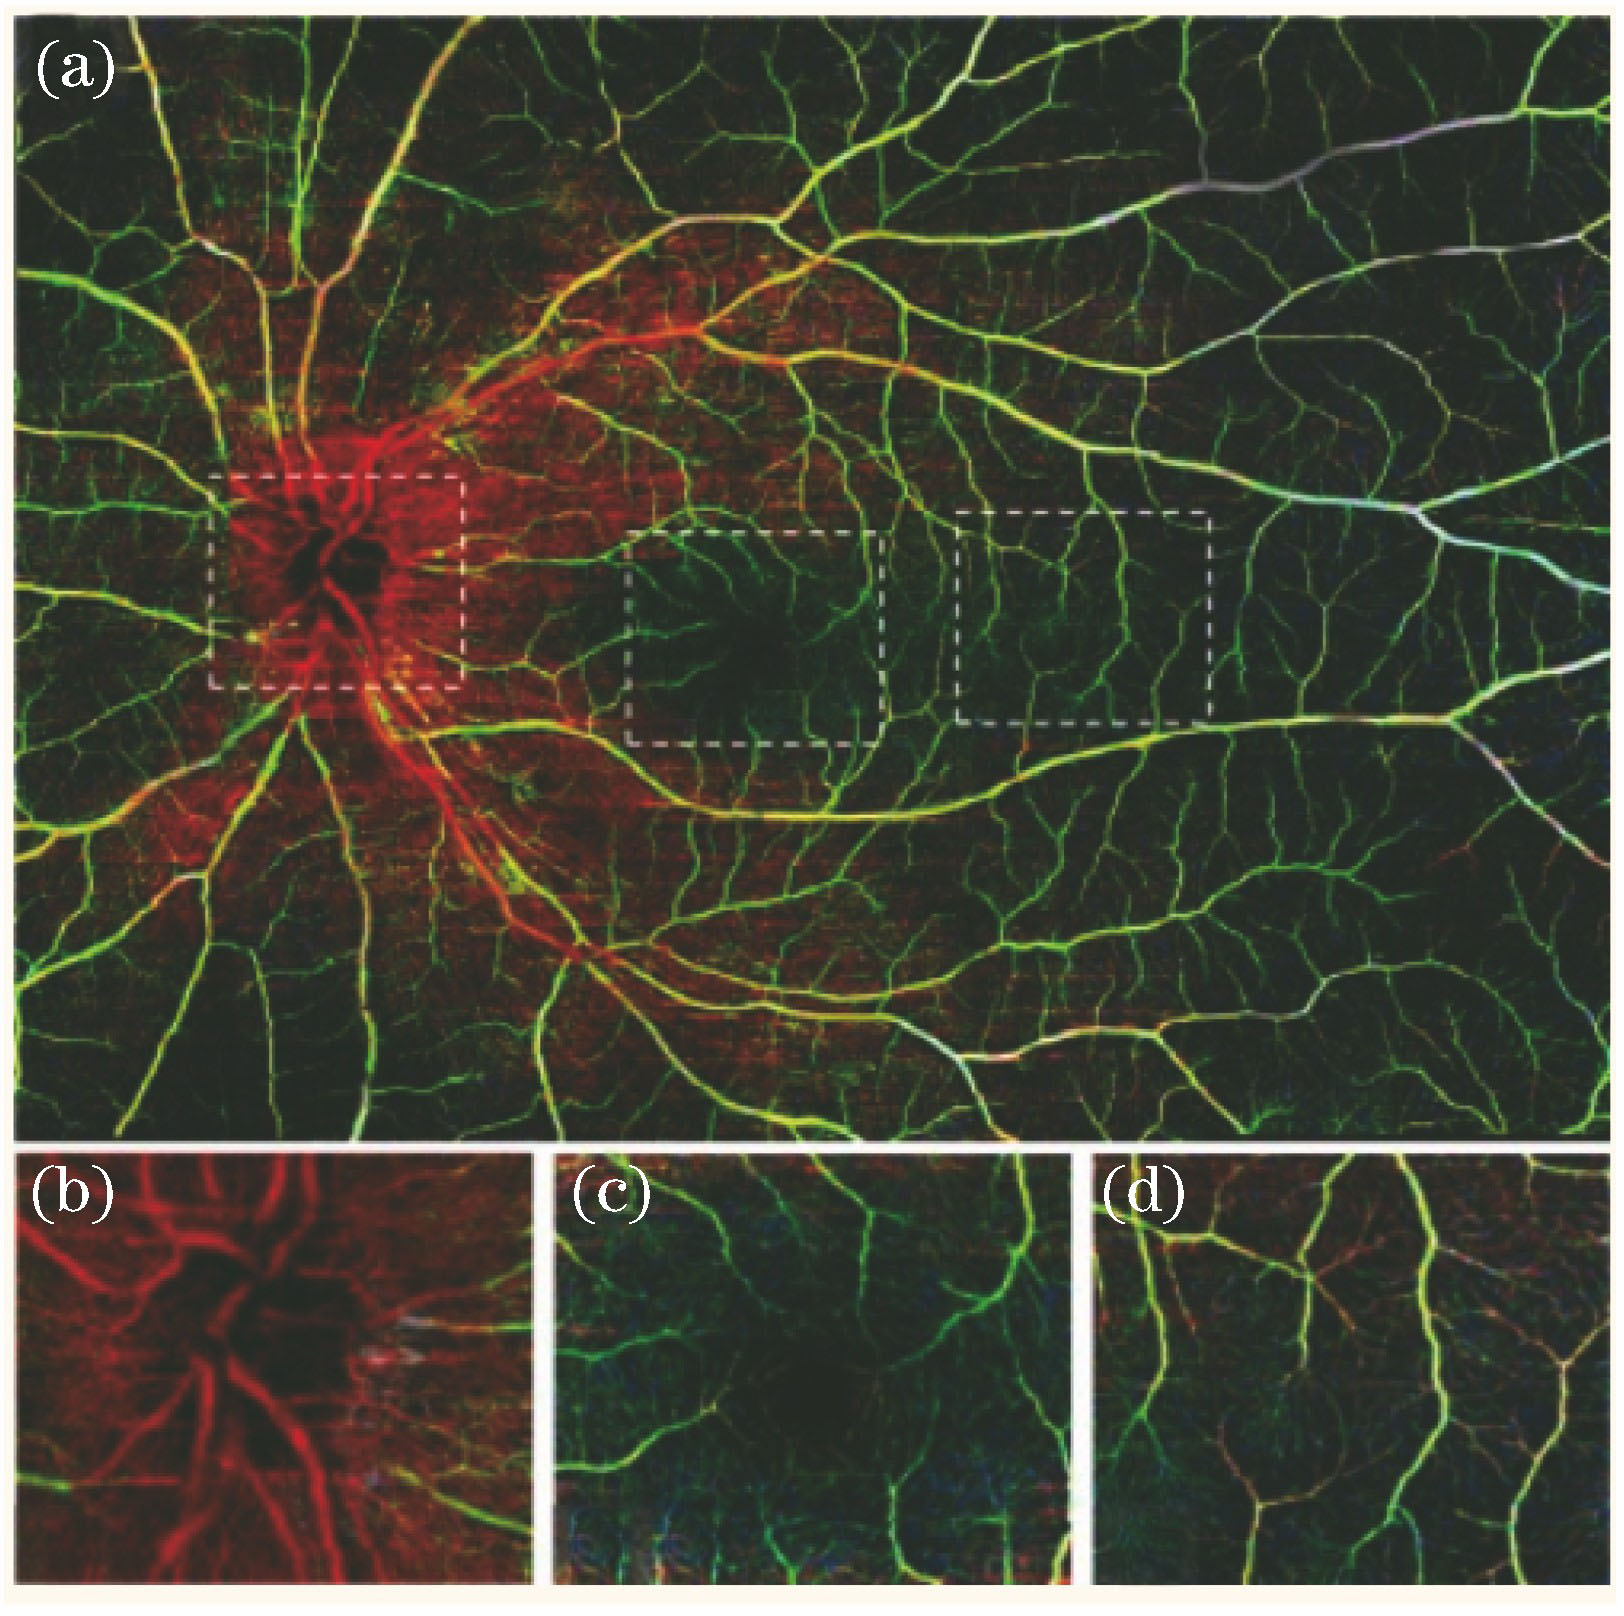 Angio-OCT images of human retina. (a) Large field of view (12 mm×16 mm) for Angio-OCT image of human retina; (b) optic nerve papilla image; (c) fovea image; (d) temporal region image (field of view is 2.0 mm×2.4 mm)[9]